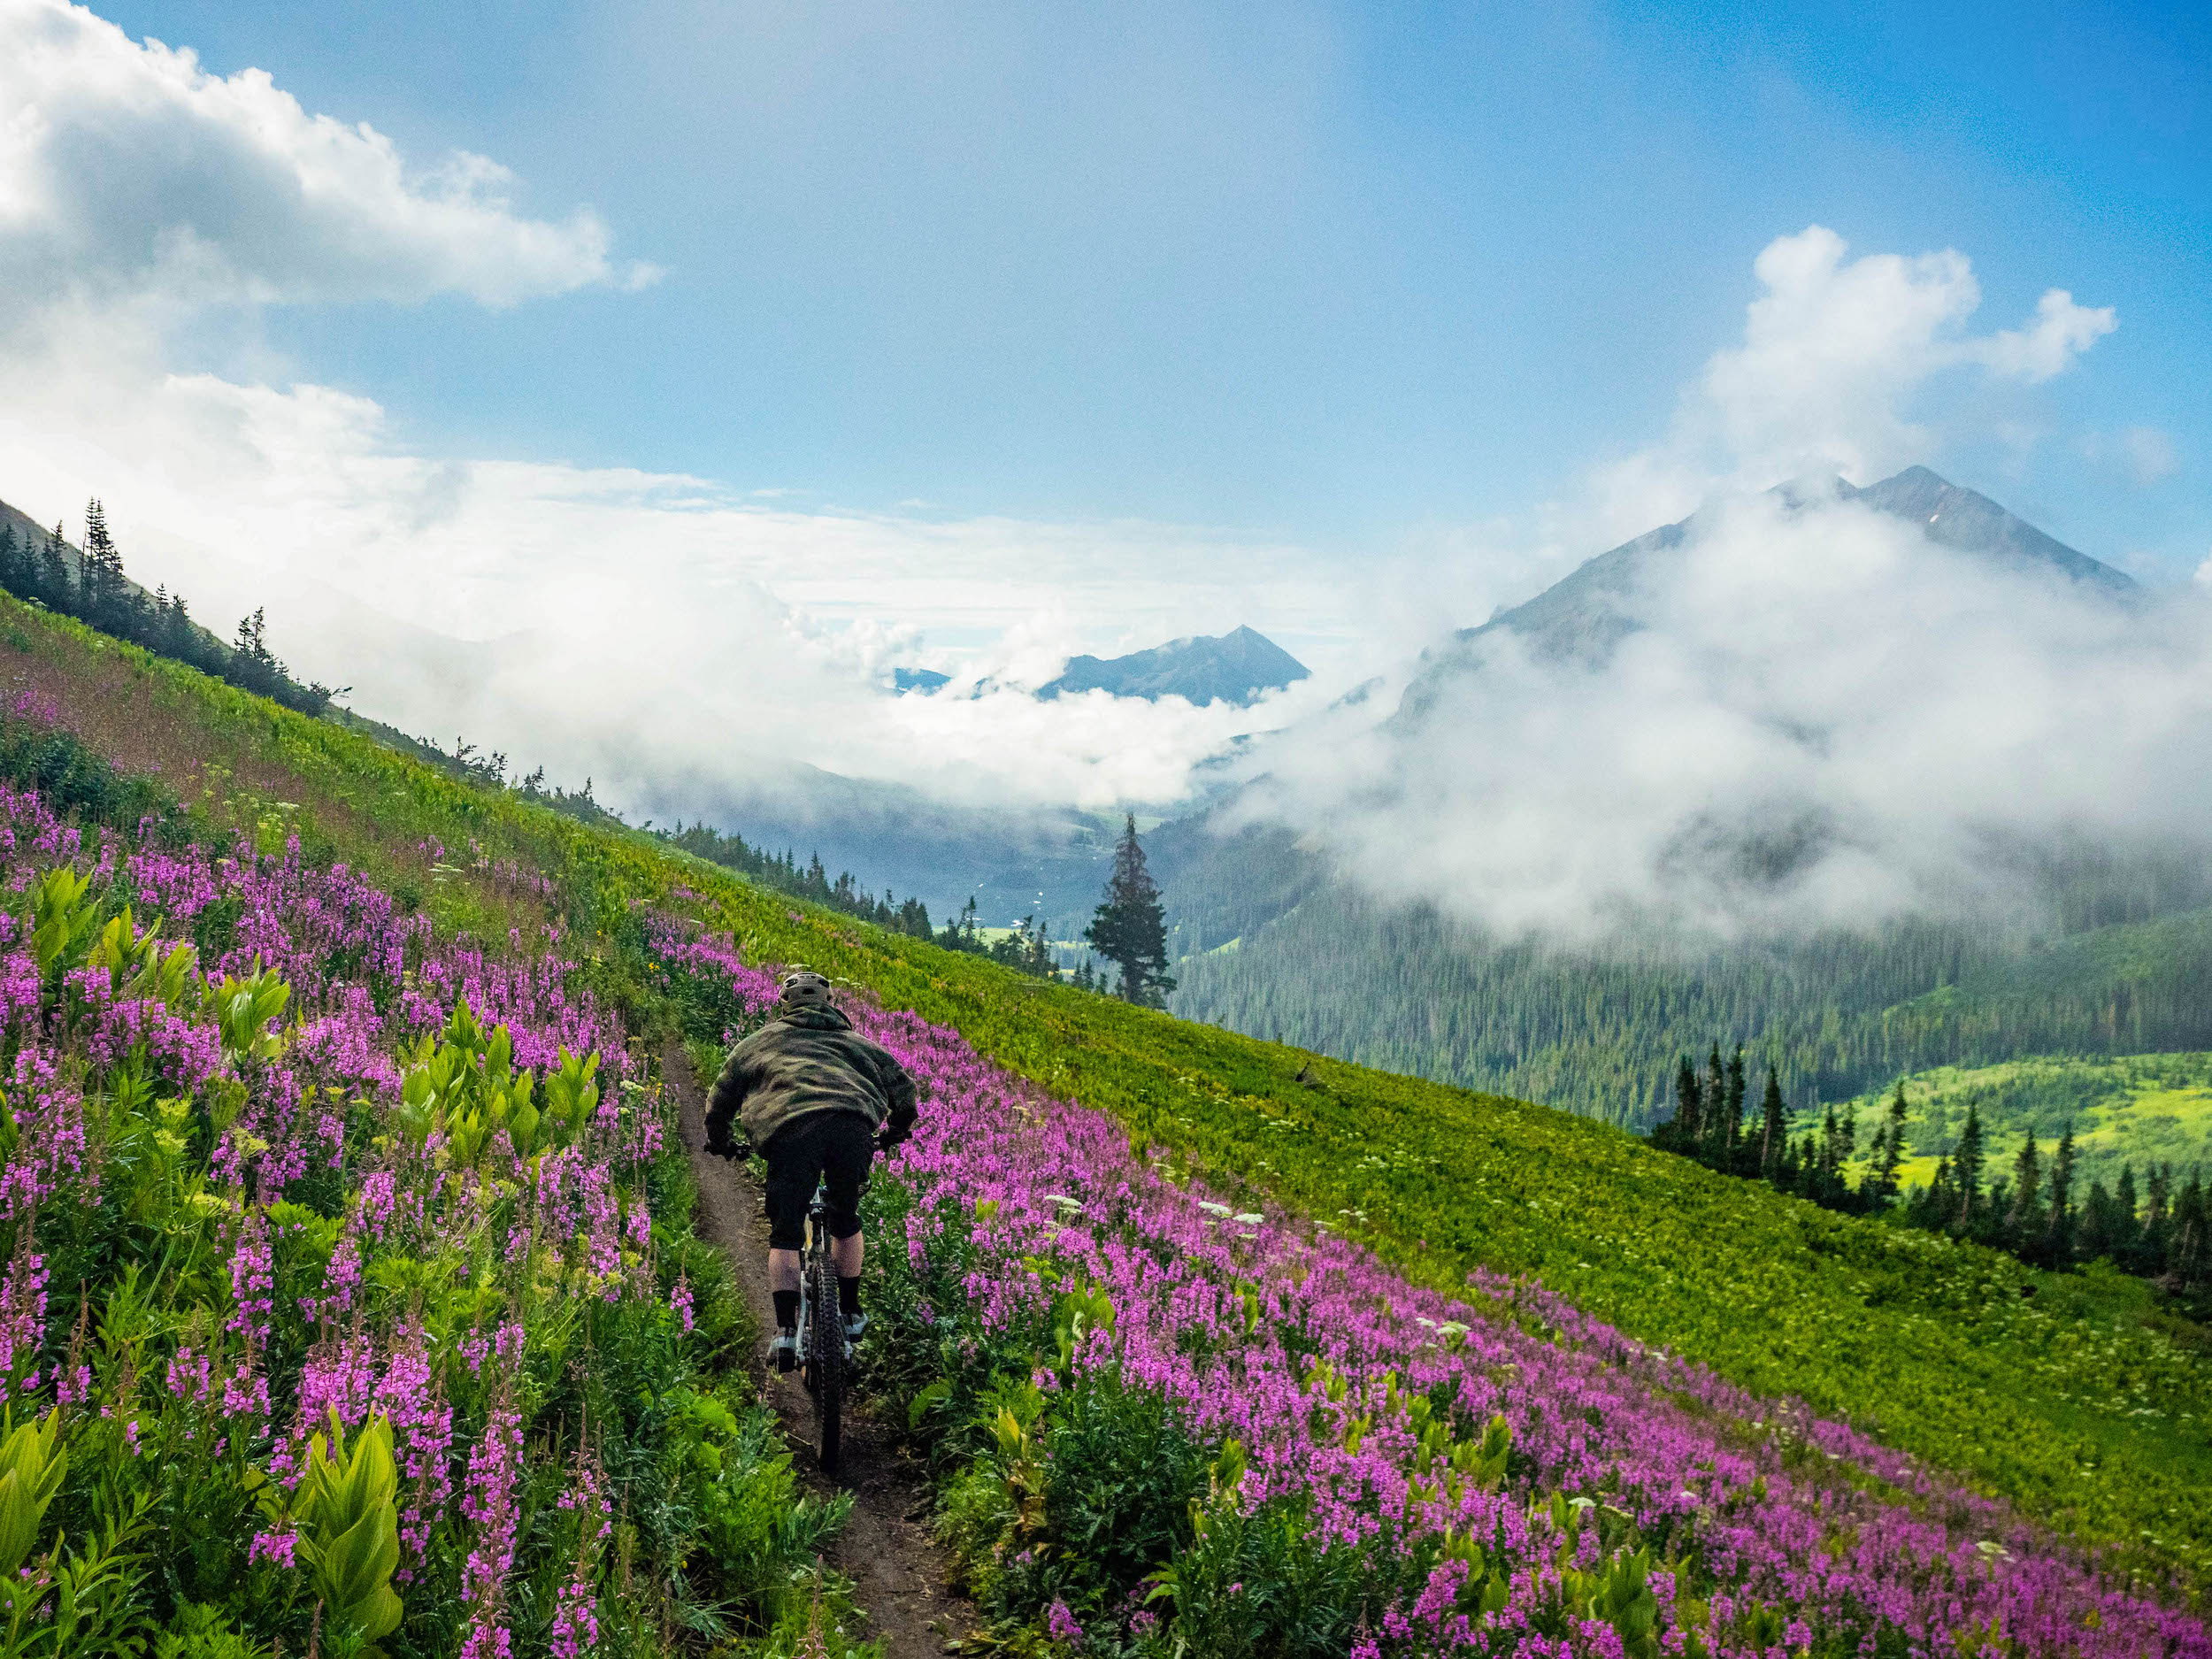 A man riding a mountain bike through a field of wildflowers with a cloud-shrouded mountain peak in the background. This man is mountain biking in Crested Butte, Colorado 